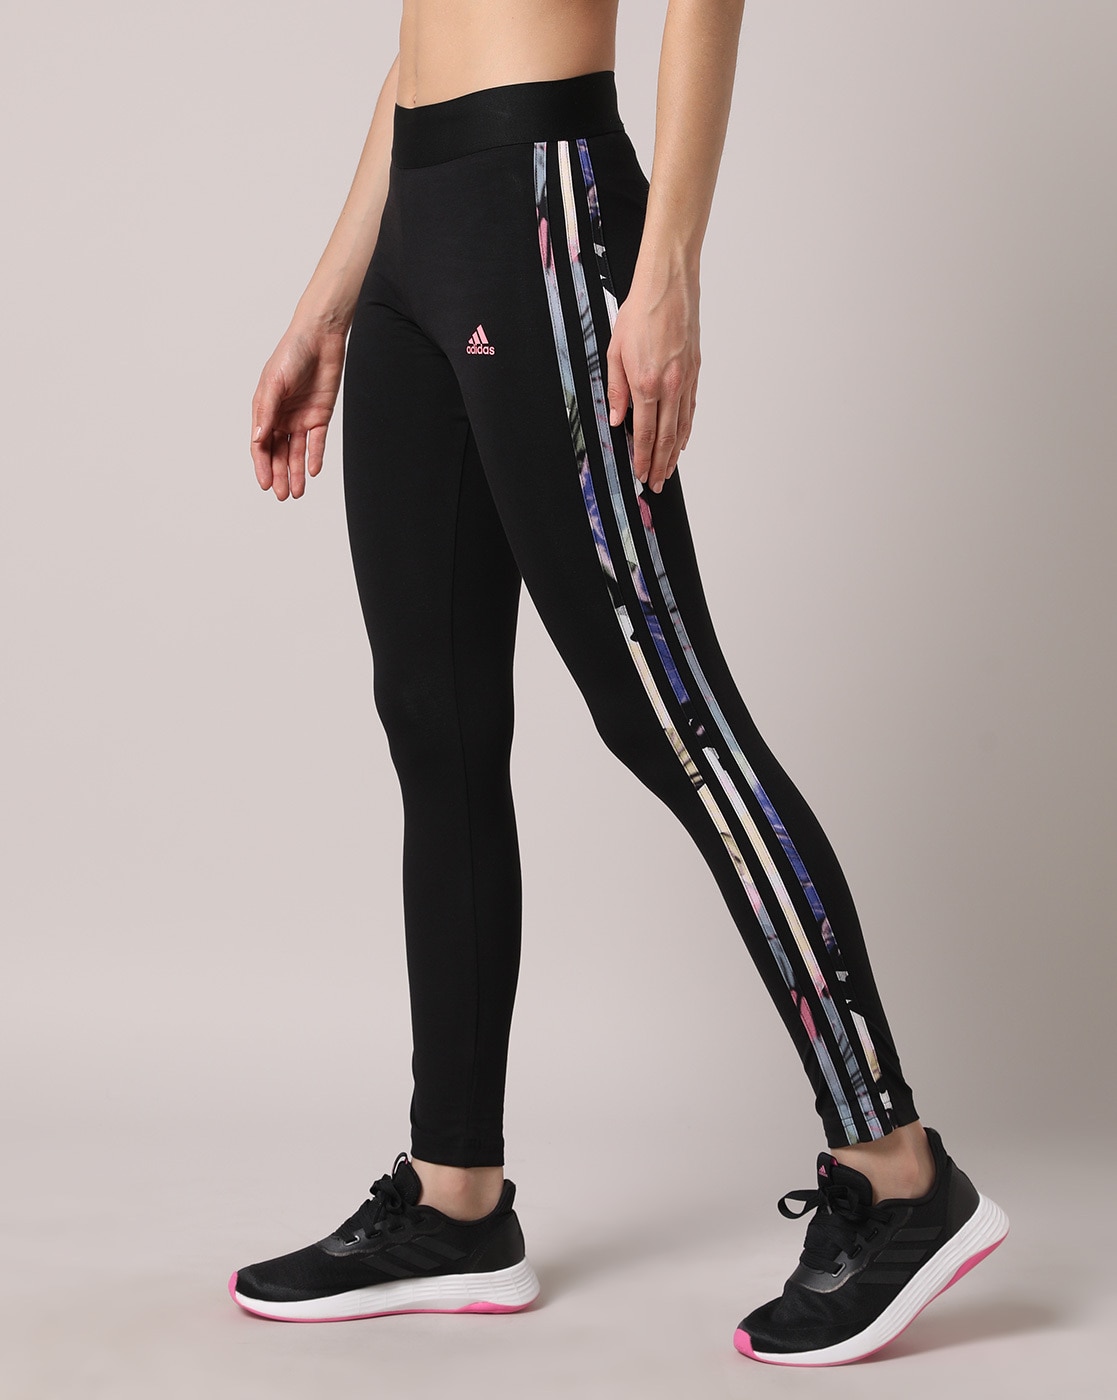 Adidas Tights - Shop for Adidas Tight Online in India | Myntra